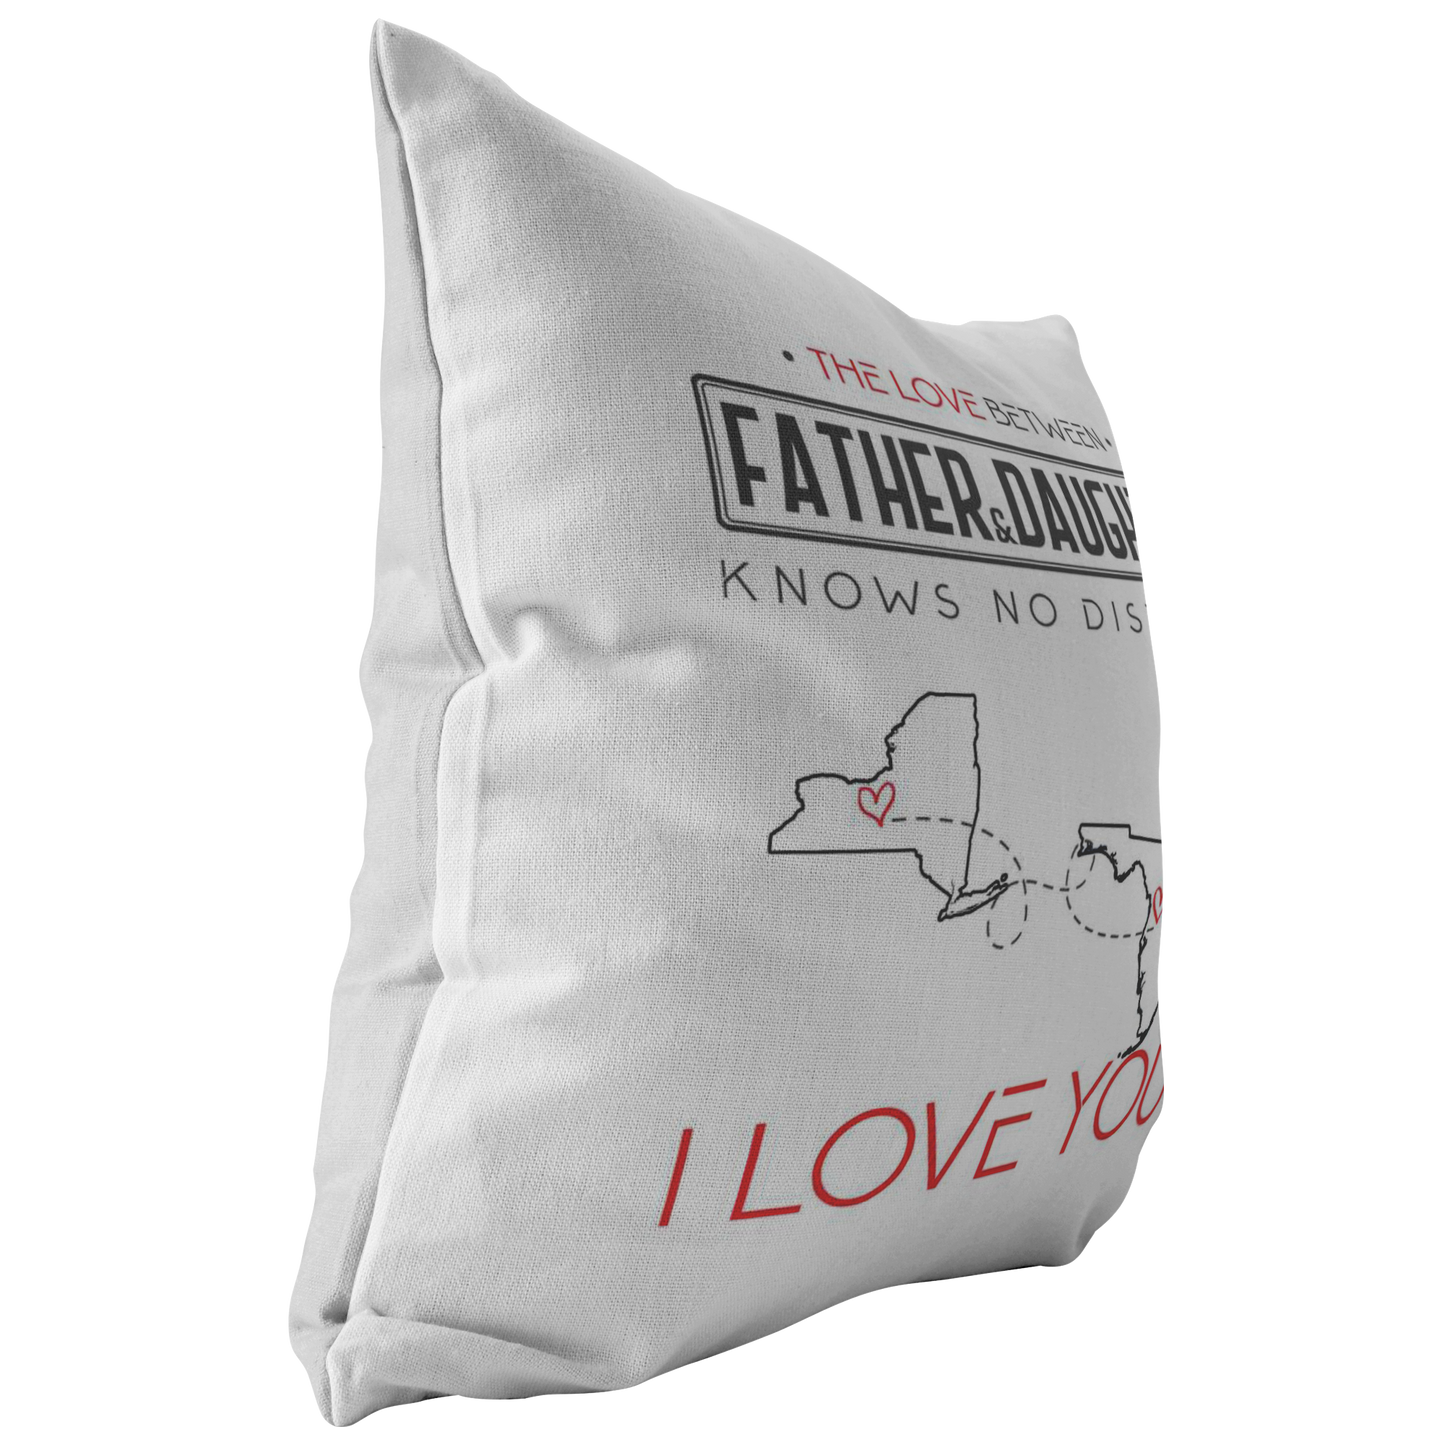 ND-pl20419438-sp-29210 - [ New York | Florida | Father And Daughter ] (PI_ThrowPillowCovers) Happy Farhers Day, Mothers Day Decoration Personalized - The